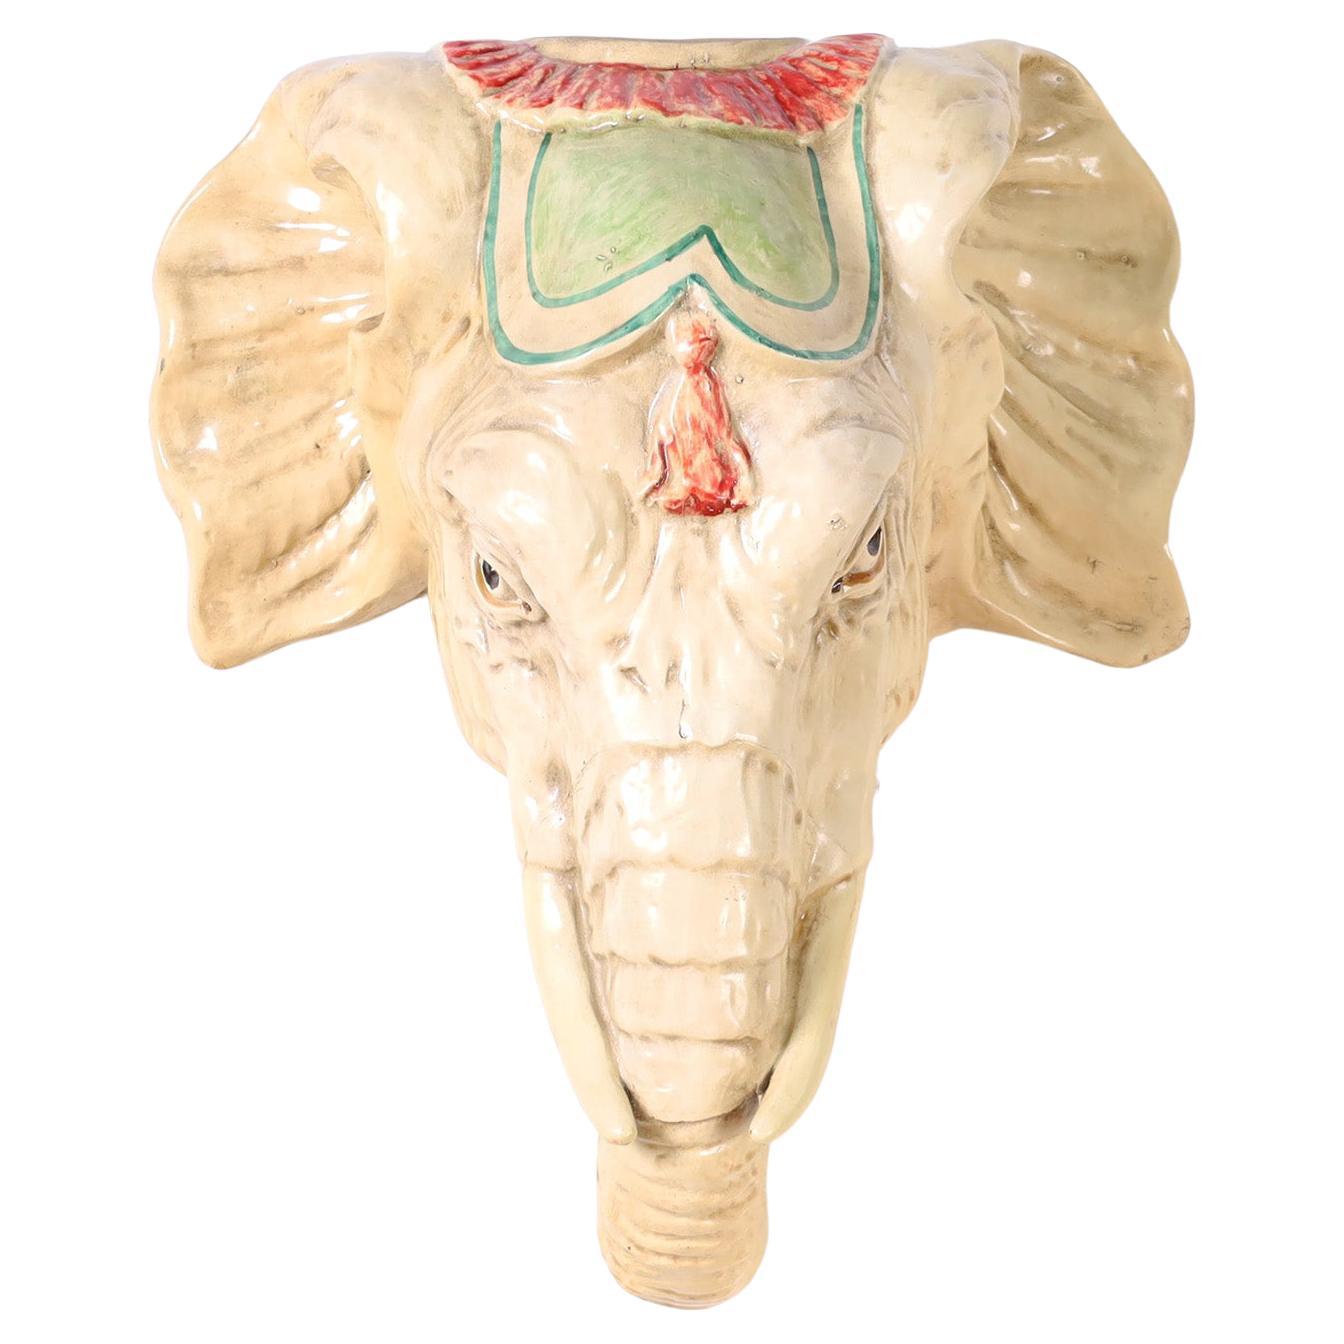 Elephant head wall sculpture crafted in composition and whimsically decorated with enamel.